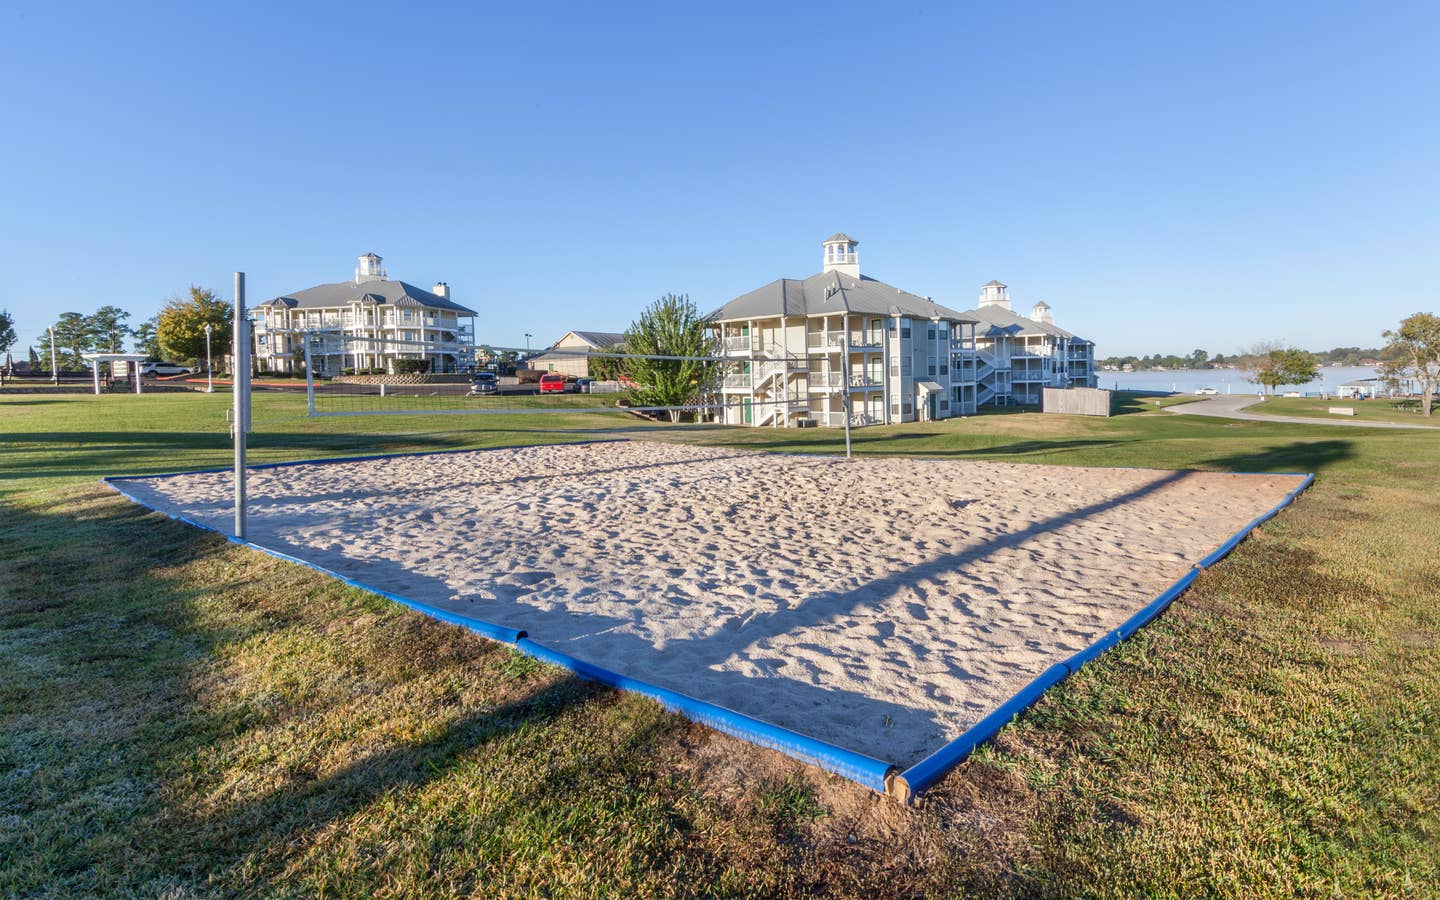 Outdoor sand volleyball at Piney Shores Resort in Conroe, Texas.